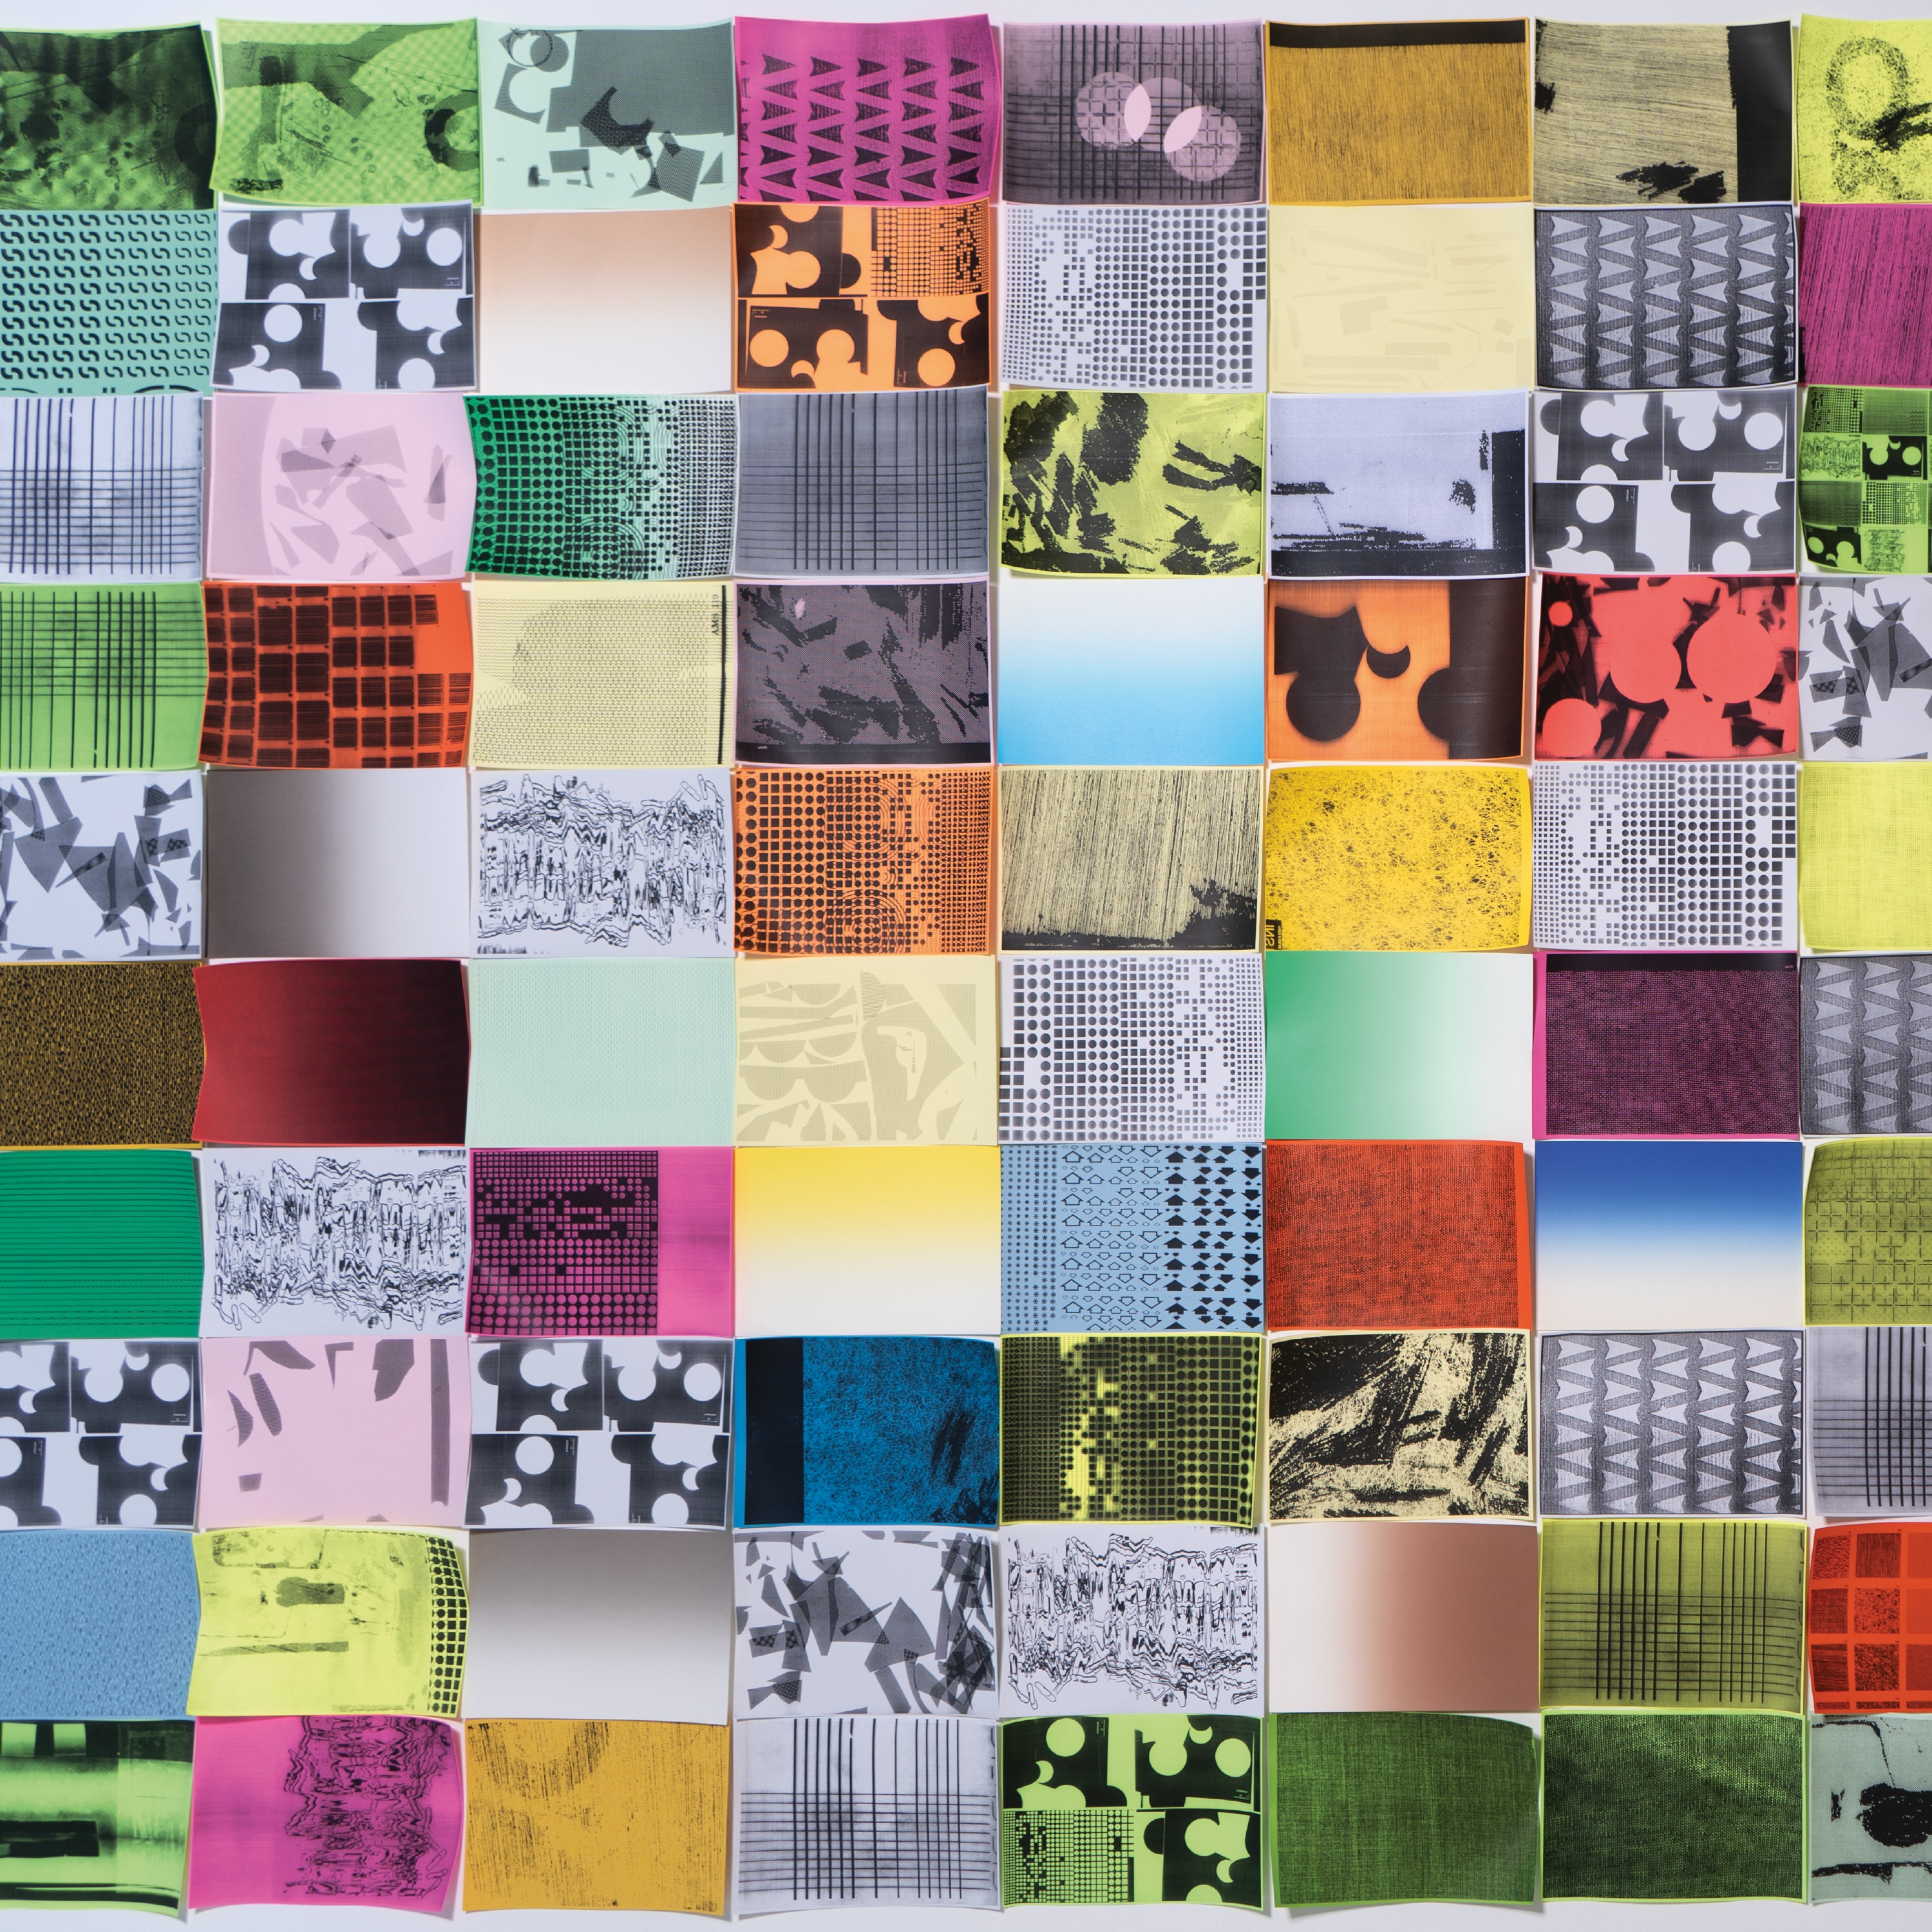 Collage of 10x8 coloured squares with textured images, shadows and drawings.